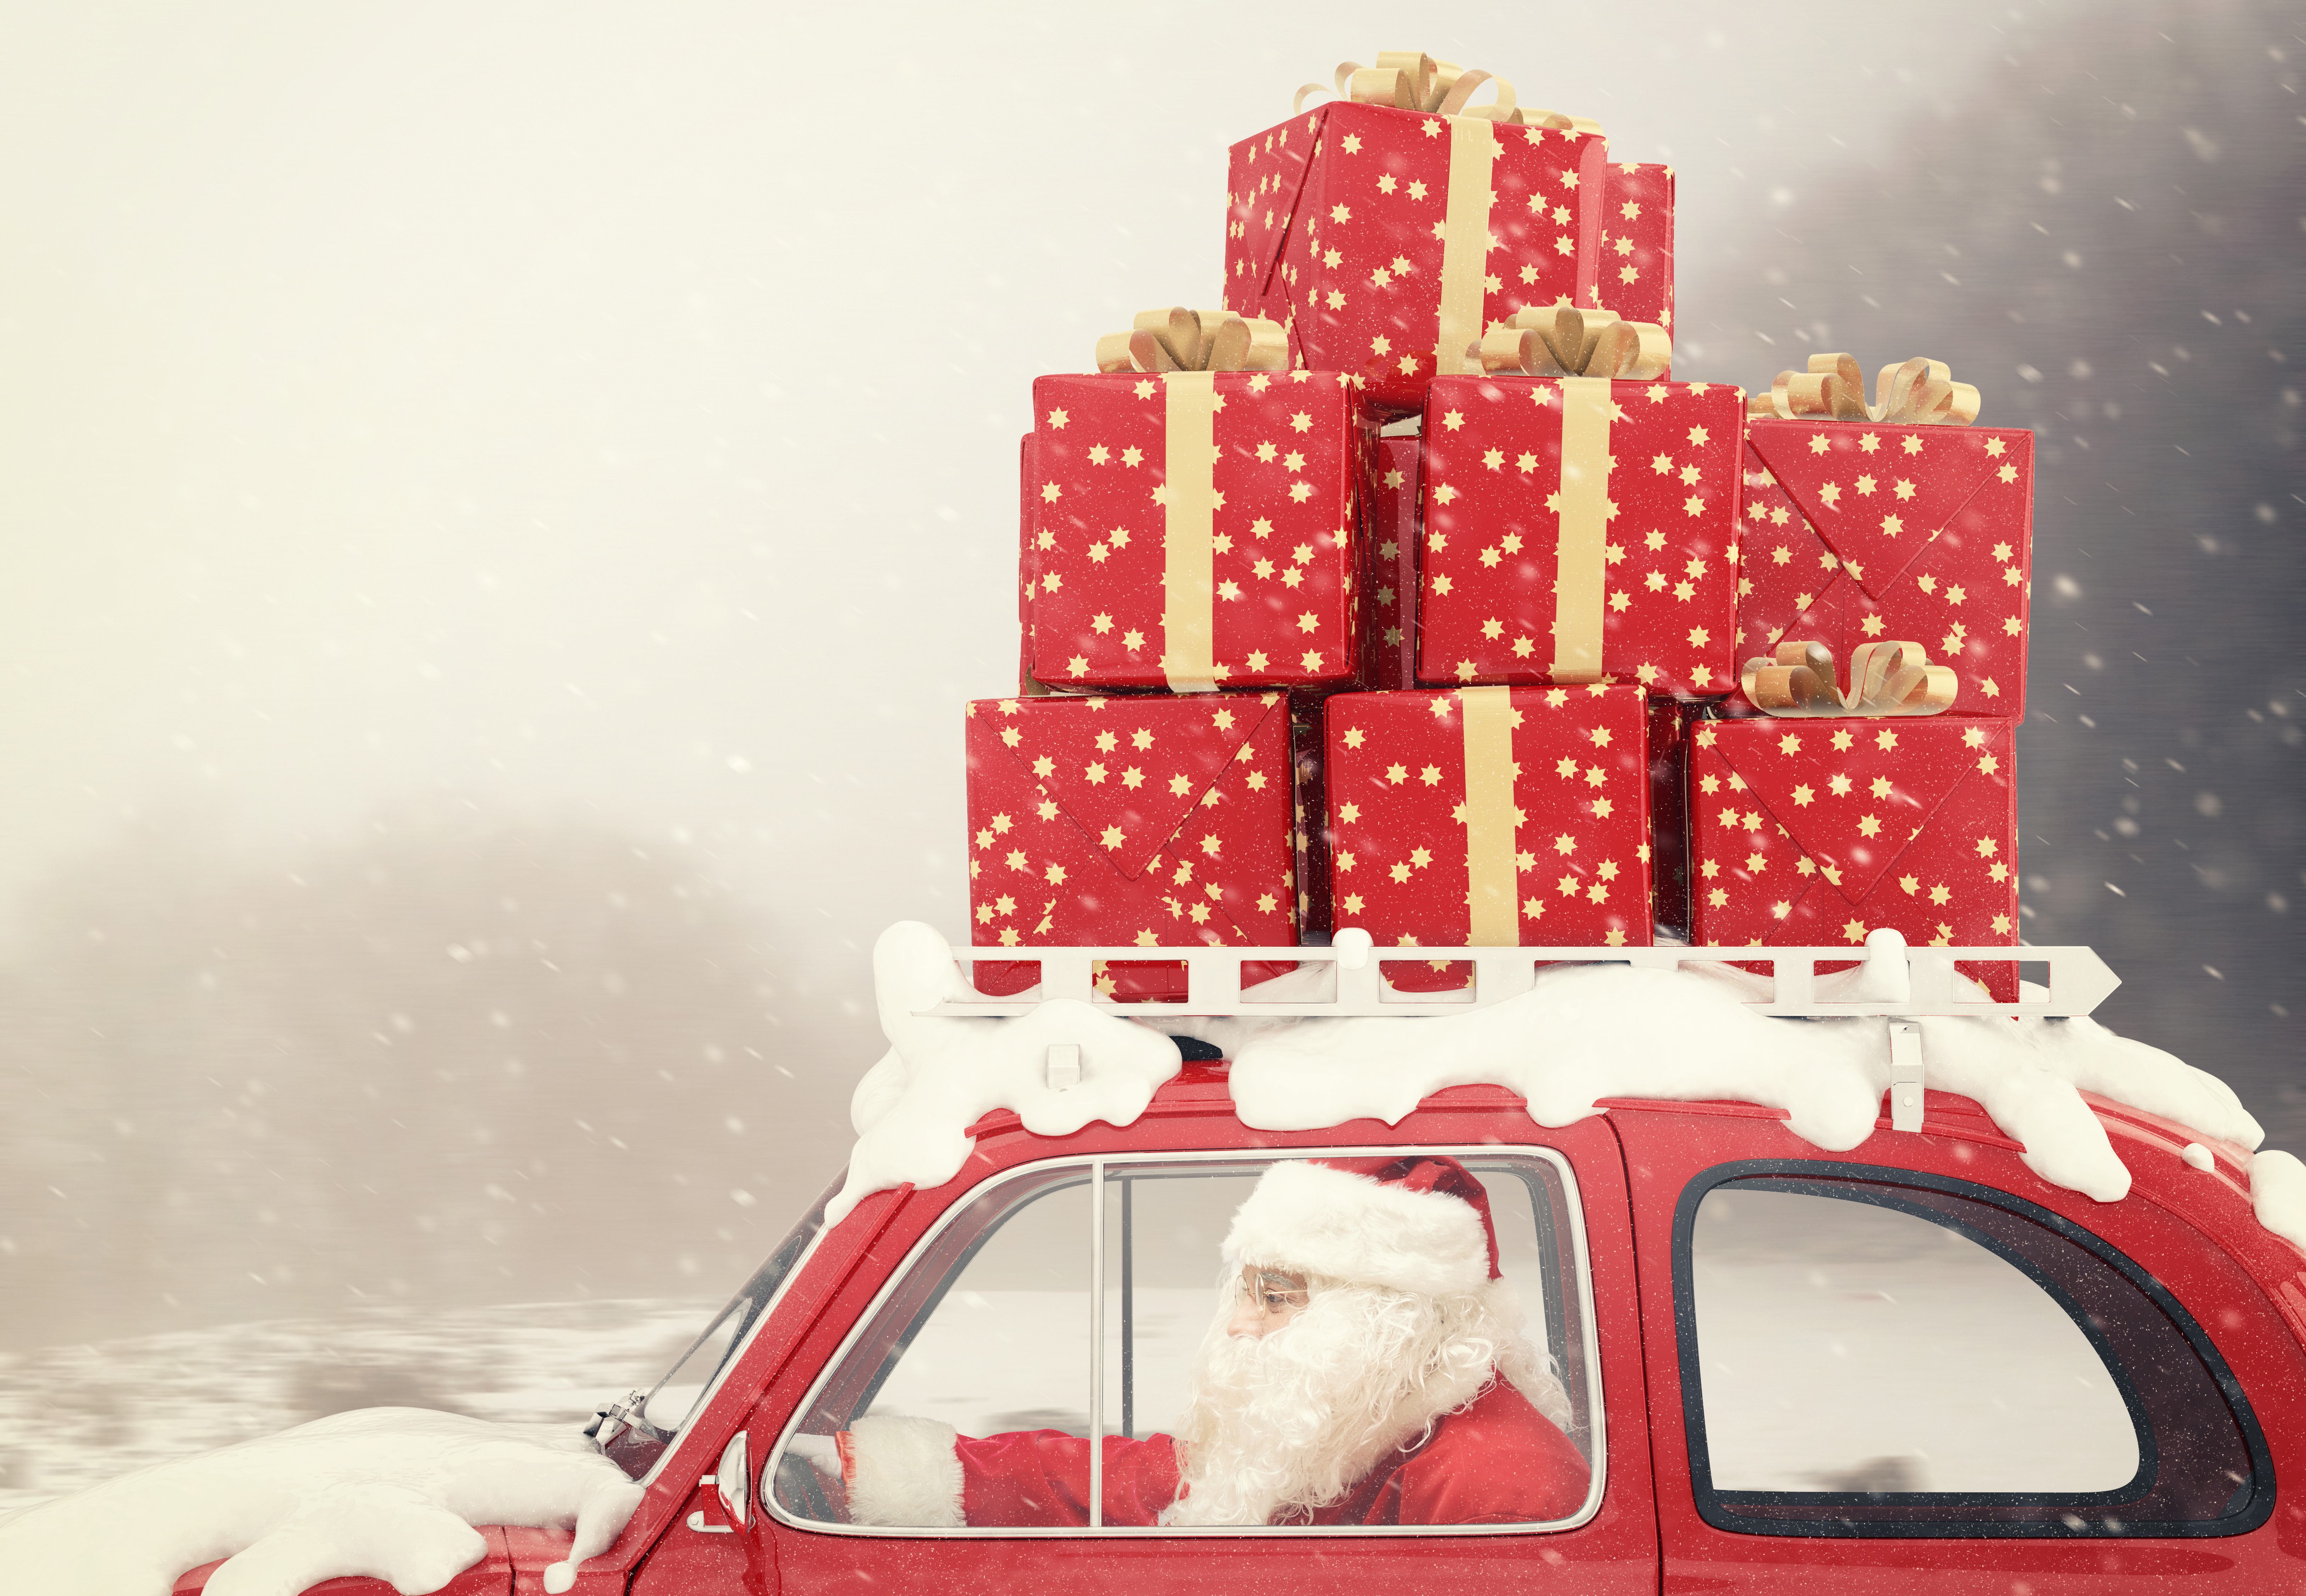 Is your social marketing strategy ready for the Christmas season?